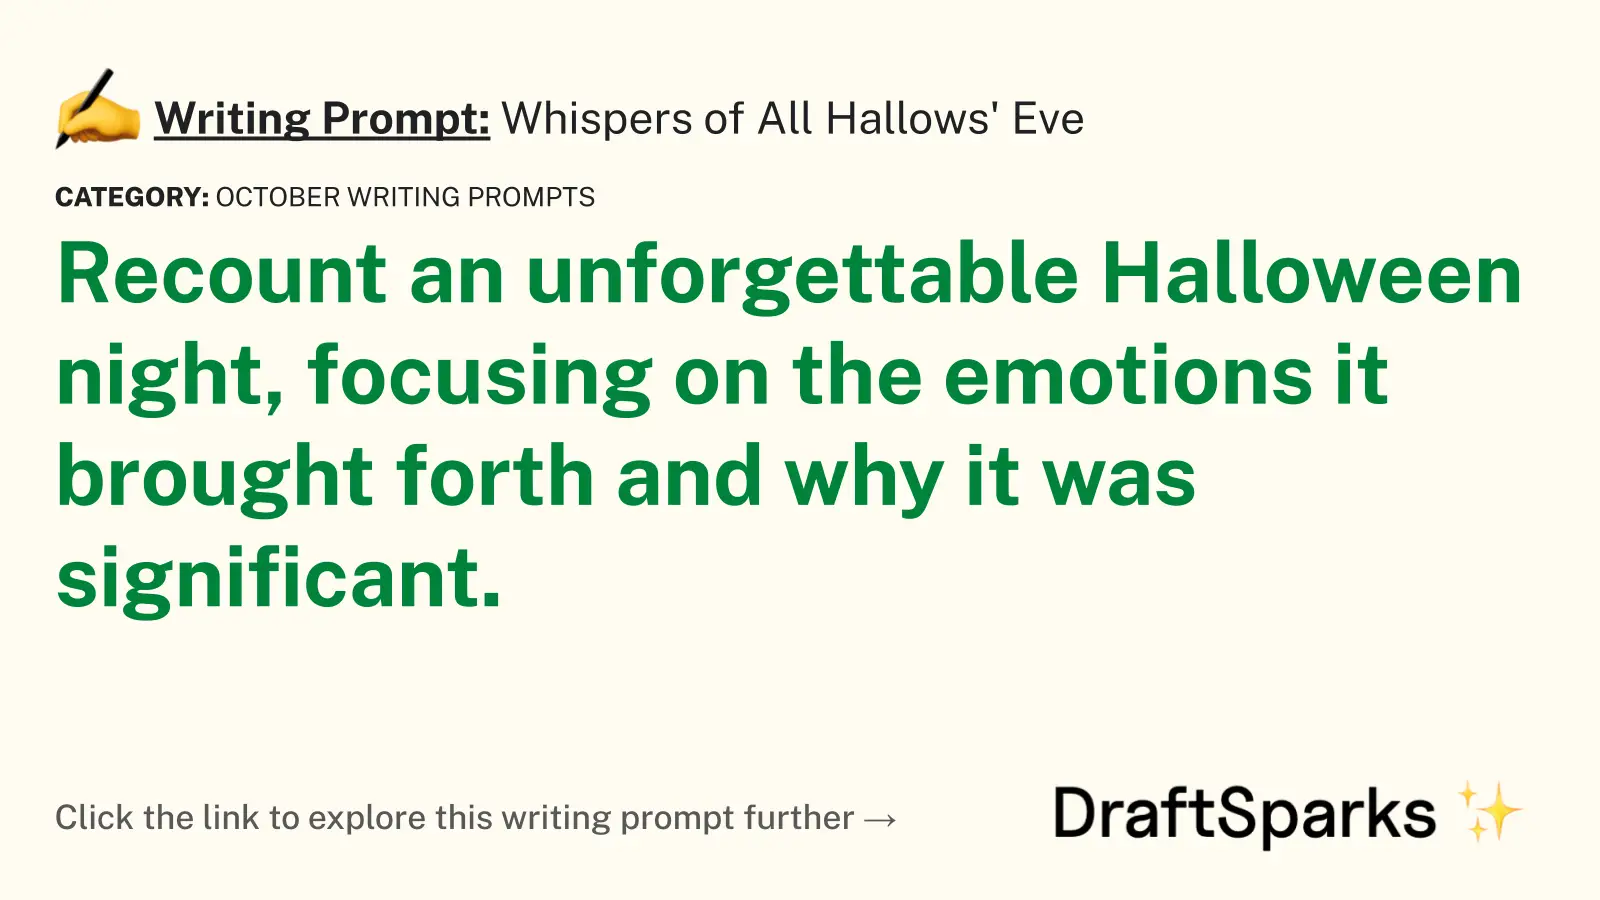 Whispers of All Hallows’ Eve